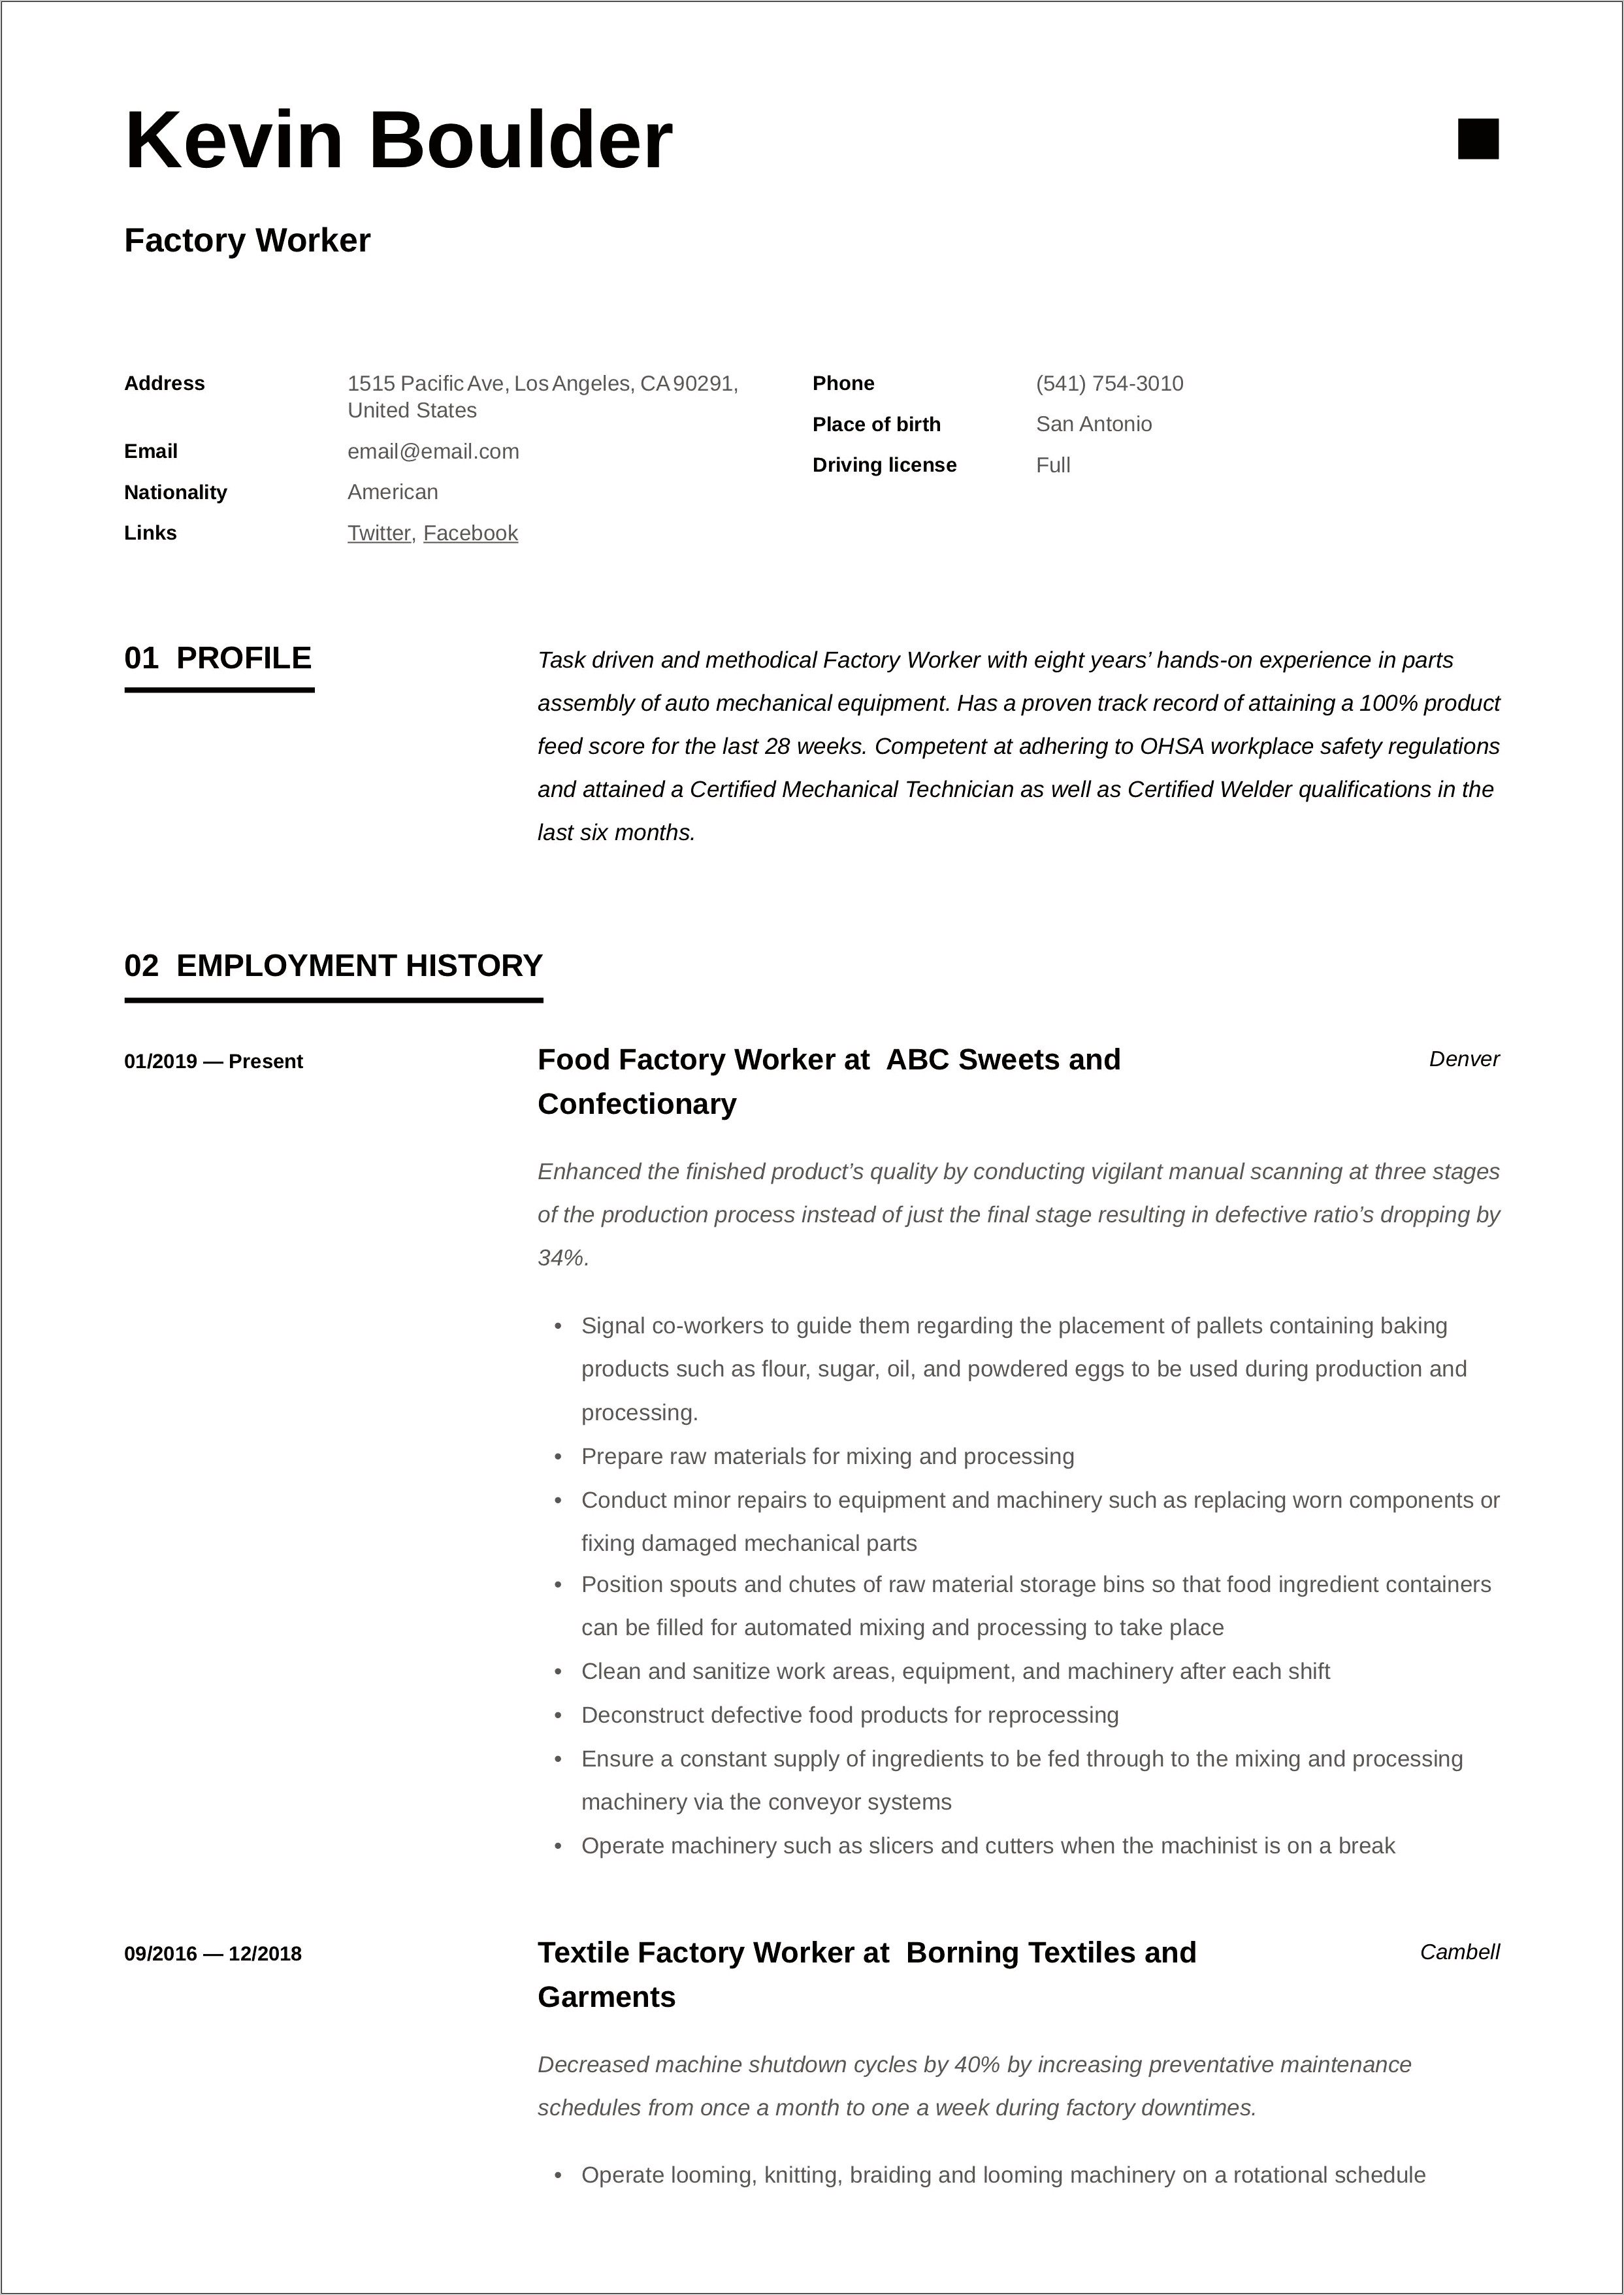 Resume Objective For Factory Worker With Experience